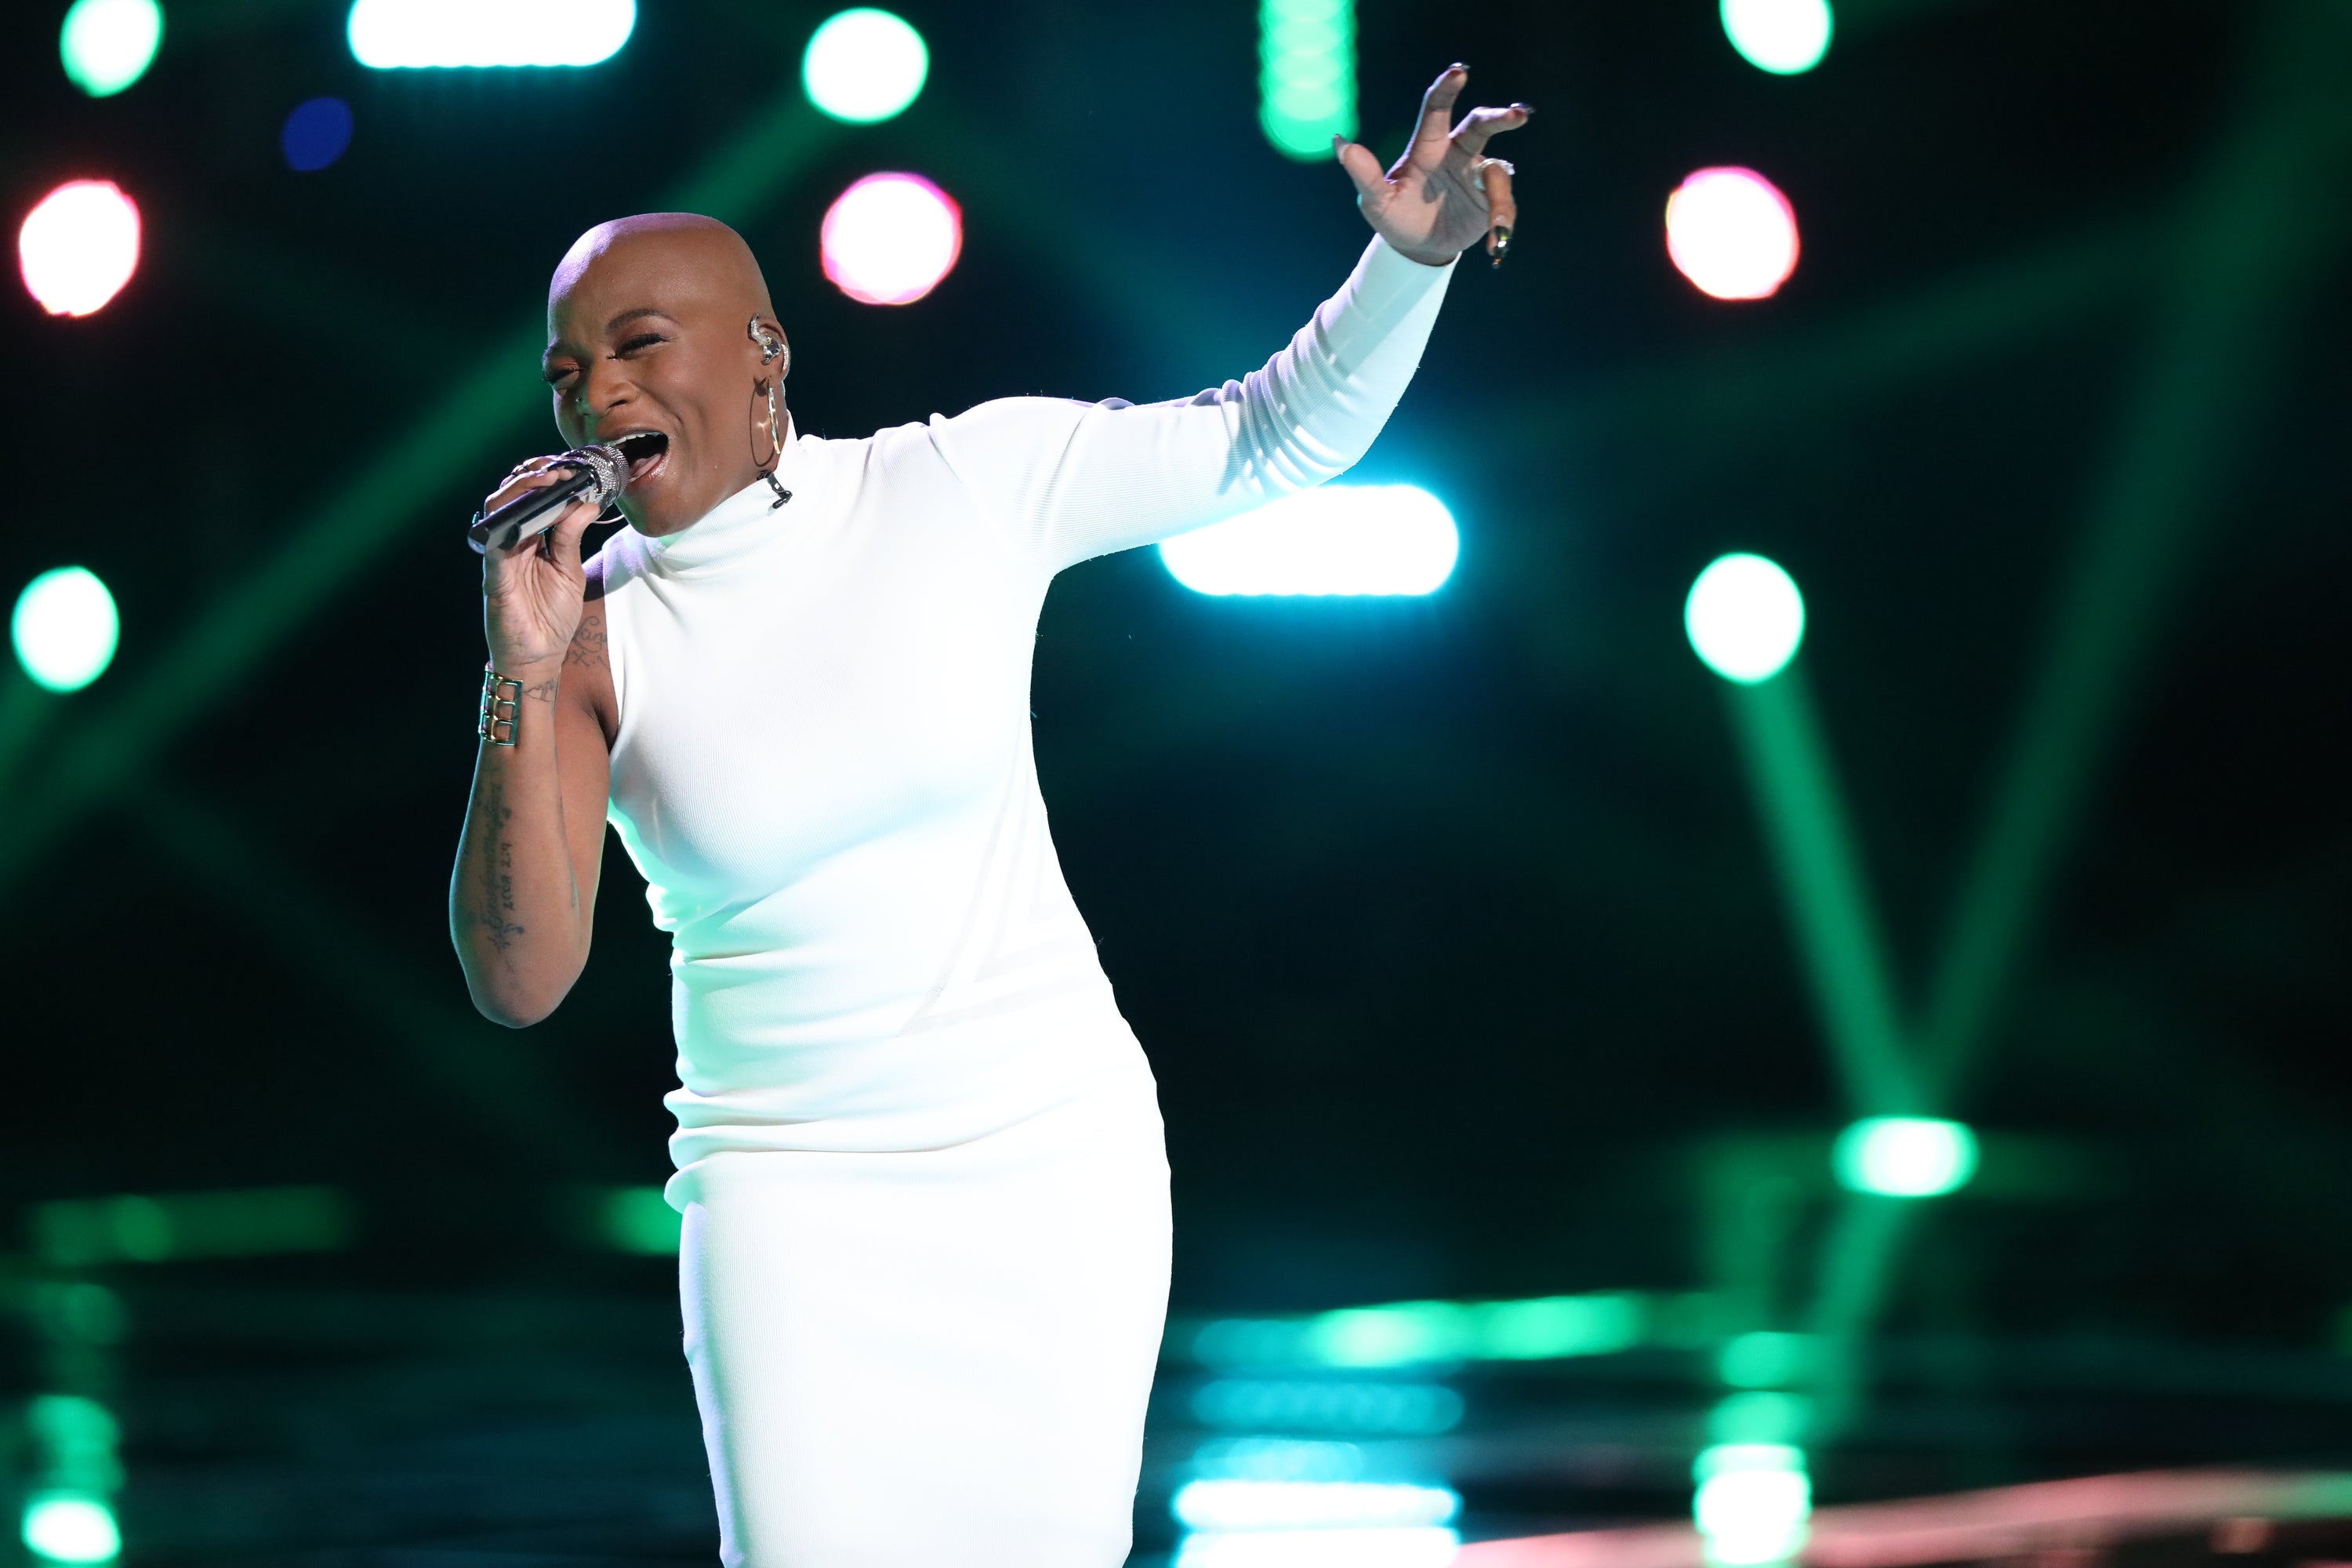 'The Voice' Singer Janice Freeman Passed Away At 33